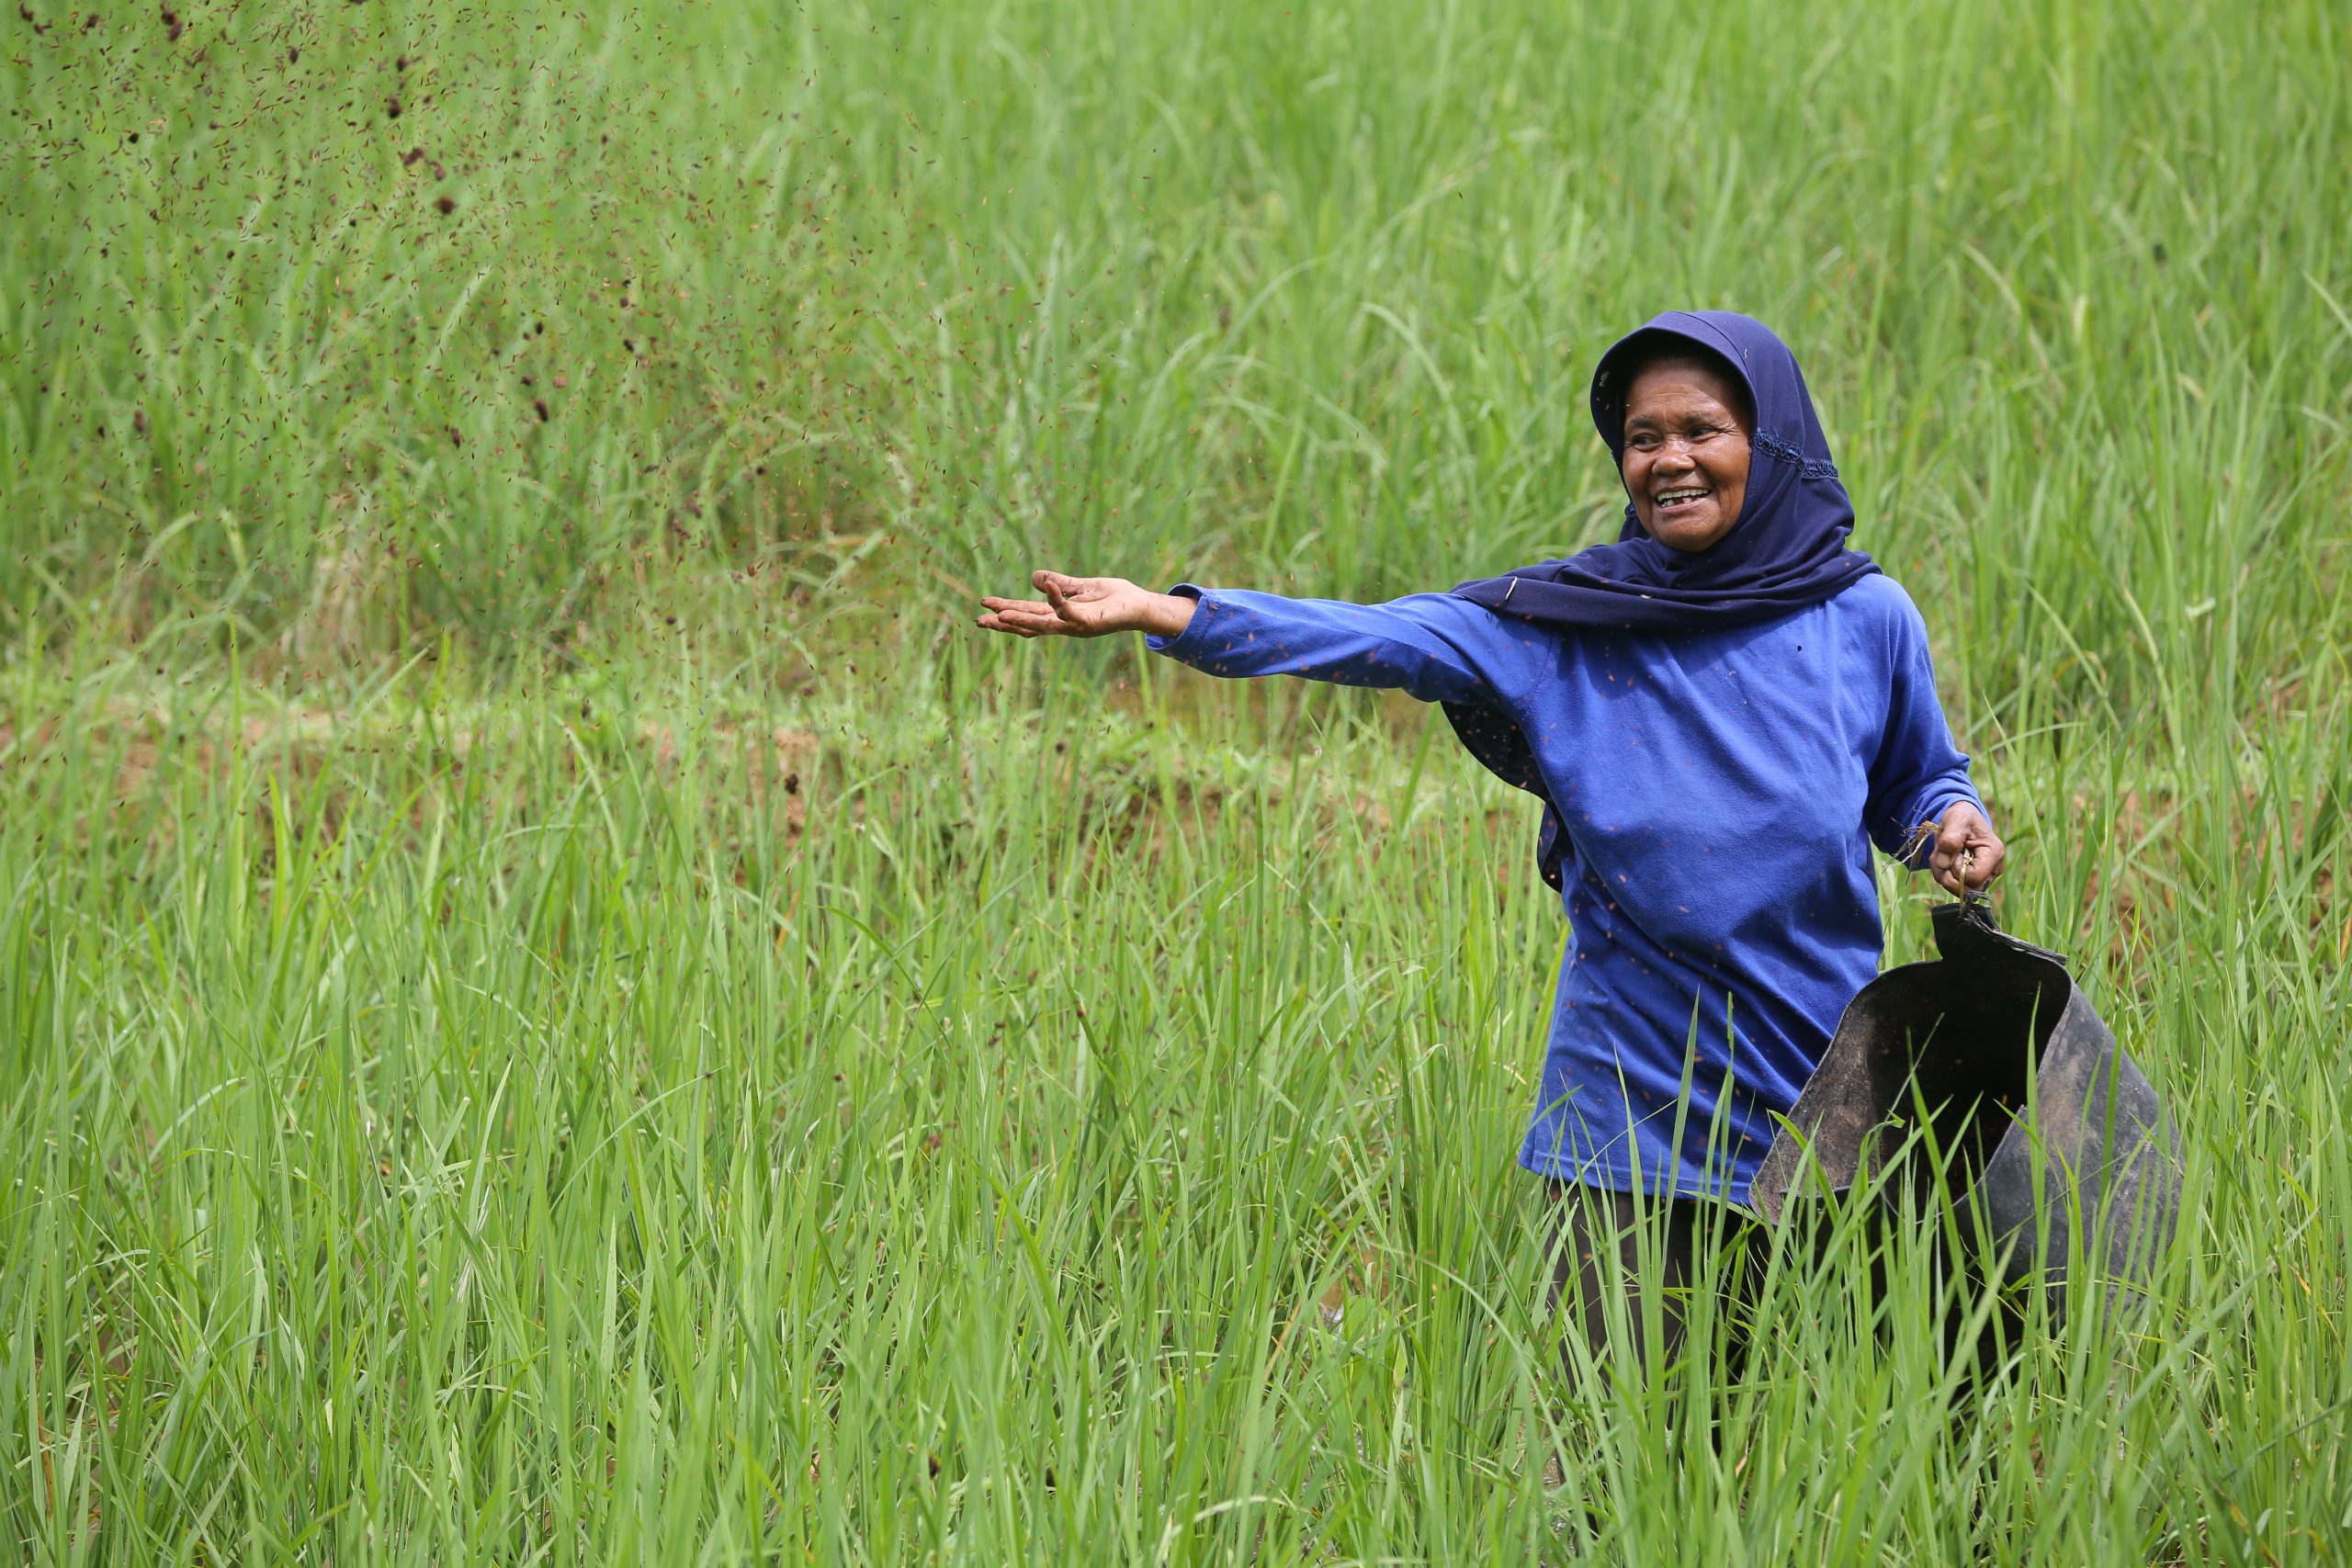 The Aek Pahu Farmers' Group was guided to use organic rice seeds, organic fertilizers, and even organic pesticides. Some farmers were even invited to join study visits to other areas to learn organic farming techniques.